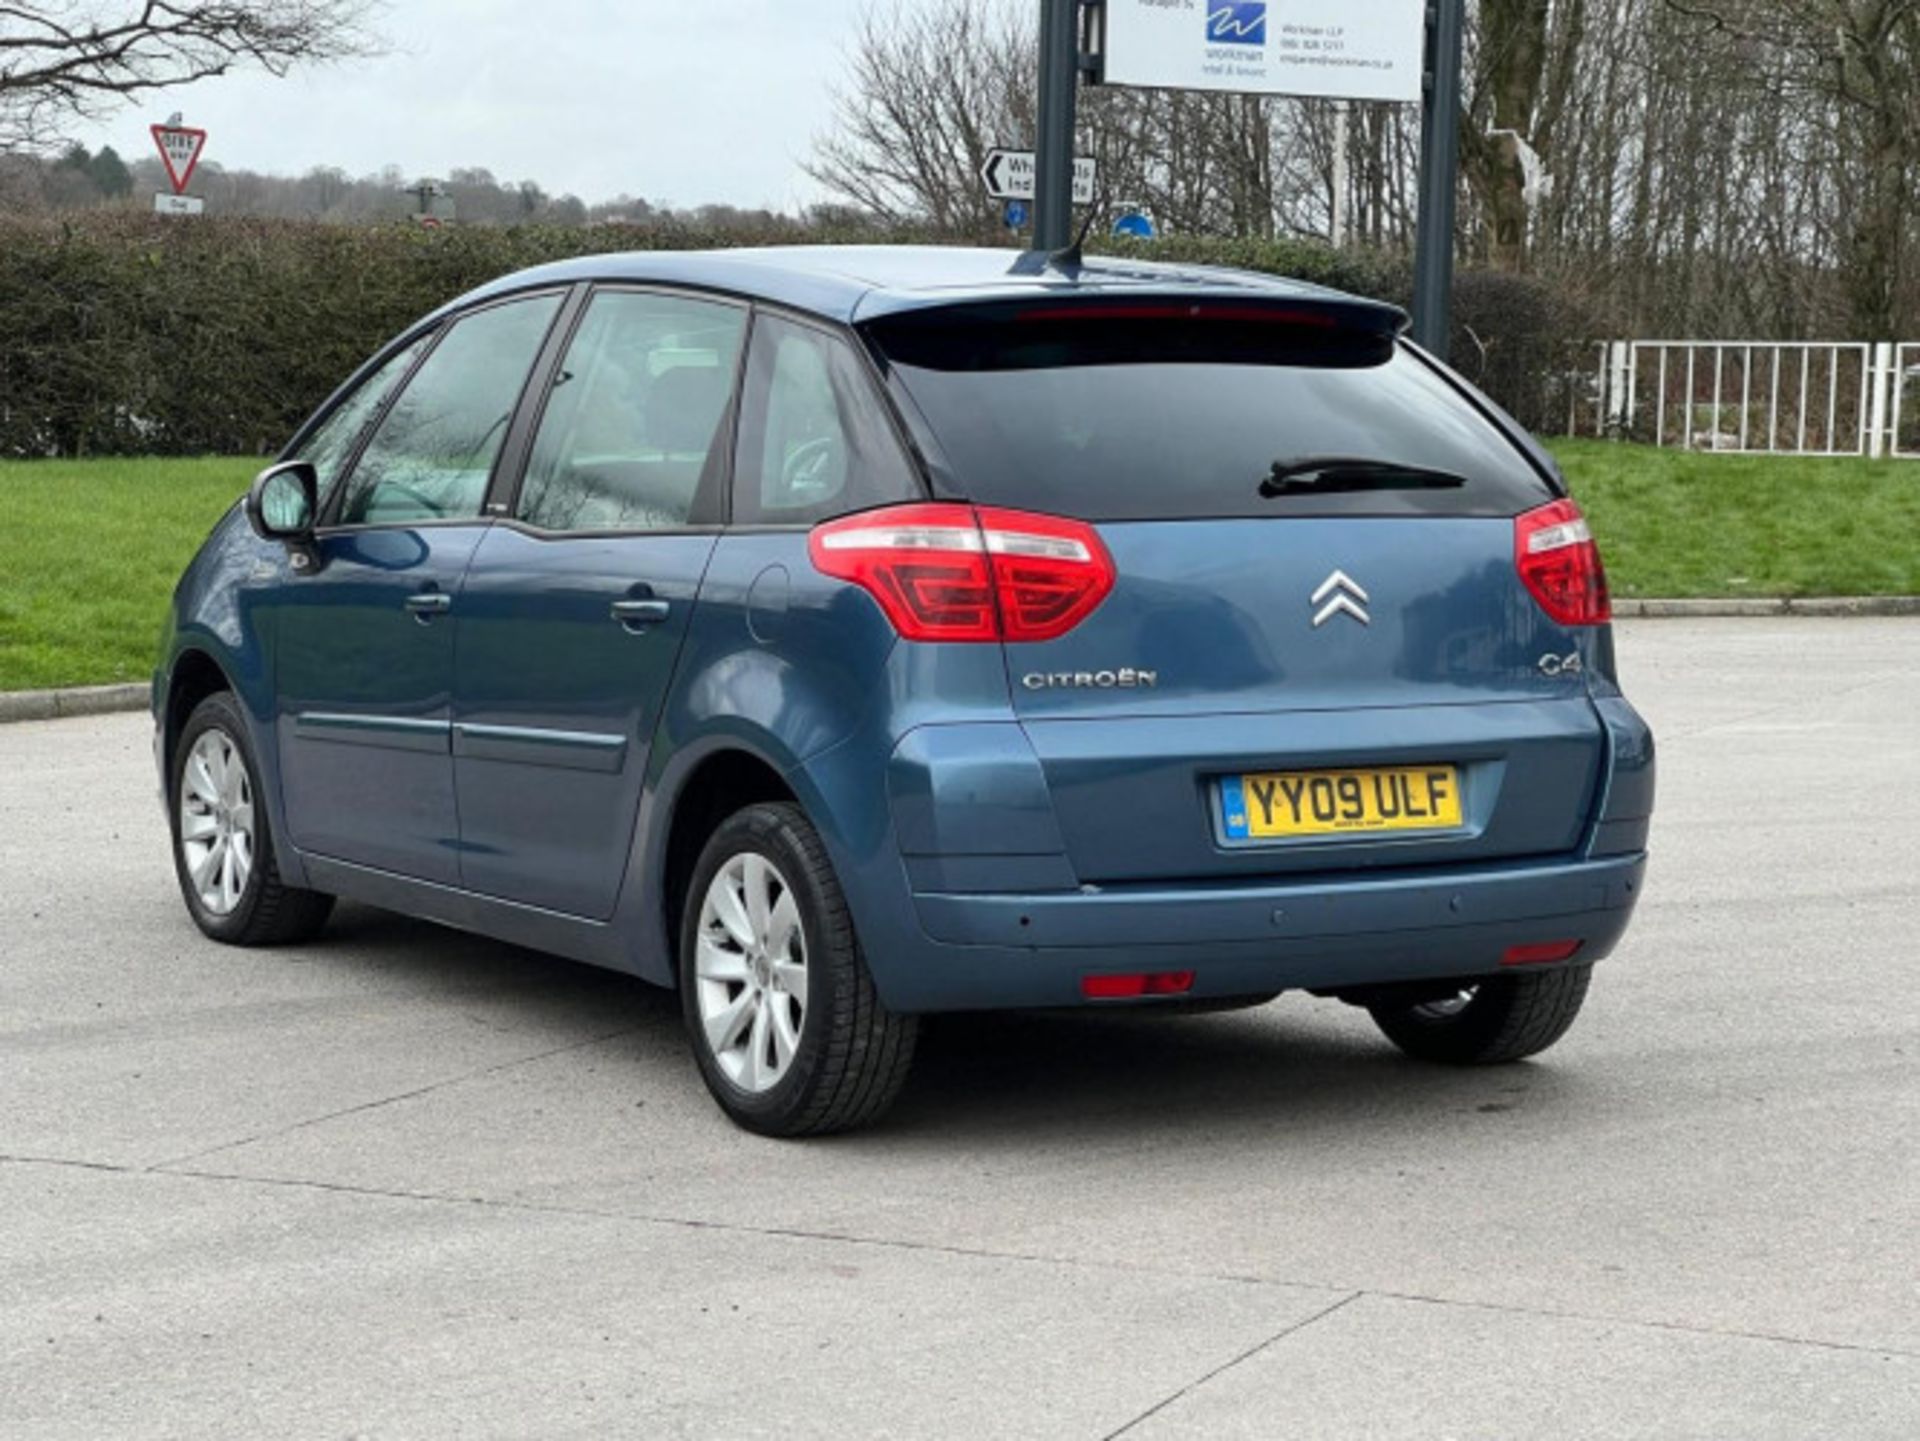 2009 CITROEN C4 PICASSO 1.6 HDI VTR+ EGS6 5DR >>--NO VAT ON HAMMER--<< - Image 113 of 123